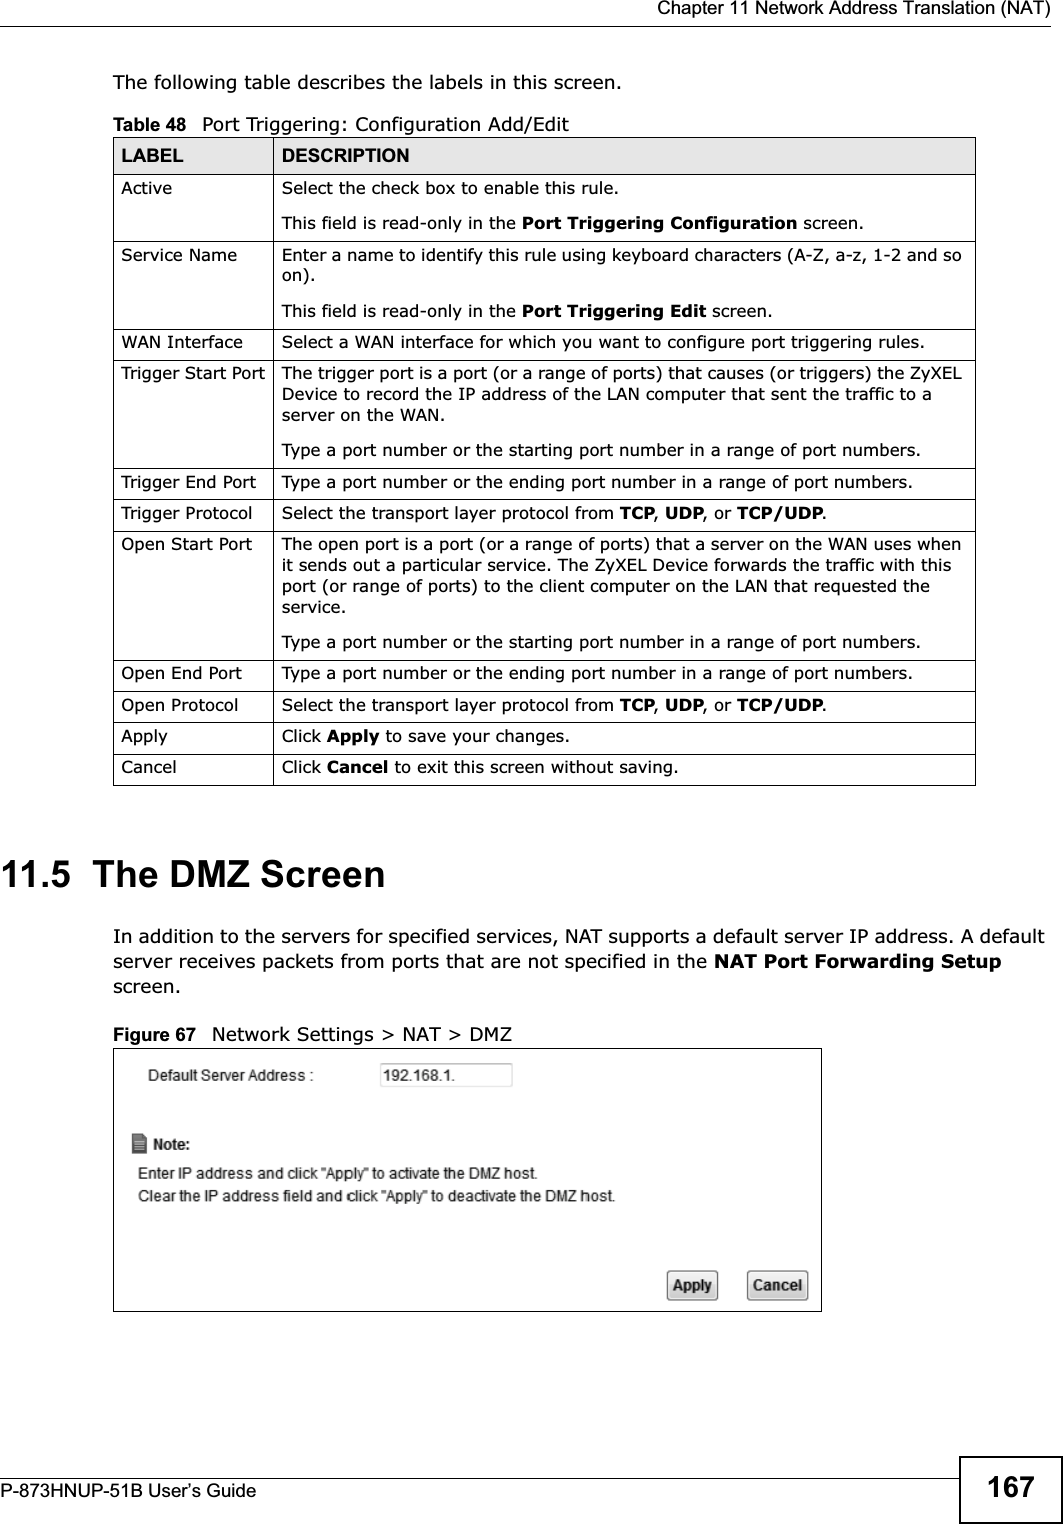  Chapter 11 Network Address Translation (NAT)P-873HNUP-51B User’s Guide 167The following table describes the labels in this screen. 11.5  The DMZ ScreenIn addition to the servers for specified services, NAT supports a default server IP address. A default server receives packets from ports that are not specified in the NAT Port Forwarding Setupscreen.Figure 67   Network Settings &gt; NAT &gt; DMZ Table 48   Port Triggering: Configuration Add/EditLABEL DESCRIPTIONActive Select the check box to enable this rule.This field is read-only in the Port Triggering Configuration screen.Service Name Enter a name to identify this rule using keyboard characters (A-Z, a-z, 1-2 and so on). This field is read-only in the Port Triggering Edit screen.WAN Interface Select a WAN interface for which you want to configure port triggering rules.Trigger Start Port The trigger port is a port (or a range of ports) that causes (or triggers) the ZyXEL Device to record the IP address of the LAN computer that sent the traffic to a server on the WAN.Type a port number or the starting port number in a range of port numbers.Trigger End Port  Type a port number or the ending port number in a range of port numbers.Trigger Protocol Select the transport layer protocol from TCP,UDP, or TCP/UDP.Open Start Port The open port is a port (or a range of ports) that a server on the WAN uses when it sends out a particular service. The ZyXEL Device forwards the traffic with this port (or range of ports) to the client computer on the LAN that requested the service. Type a port number or the starting port number in a range of port numbers.Open End Port  Type a port number or the ending port number in a range of port numbers.Open Protocol Select the transport layer protocol from TCP,UDP, or TCP/UDP.Apply Click Apply to save your changes.Cancel Click Cancel to exit this screen without saving.